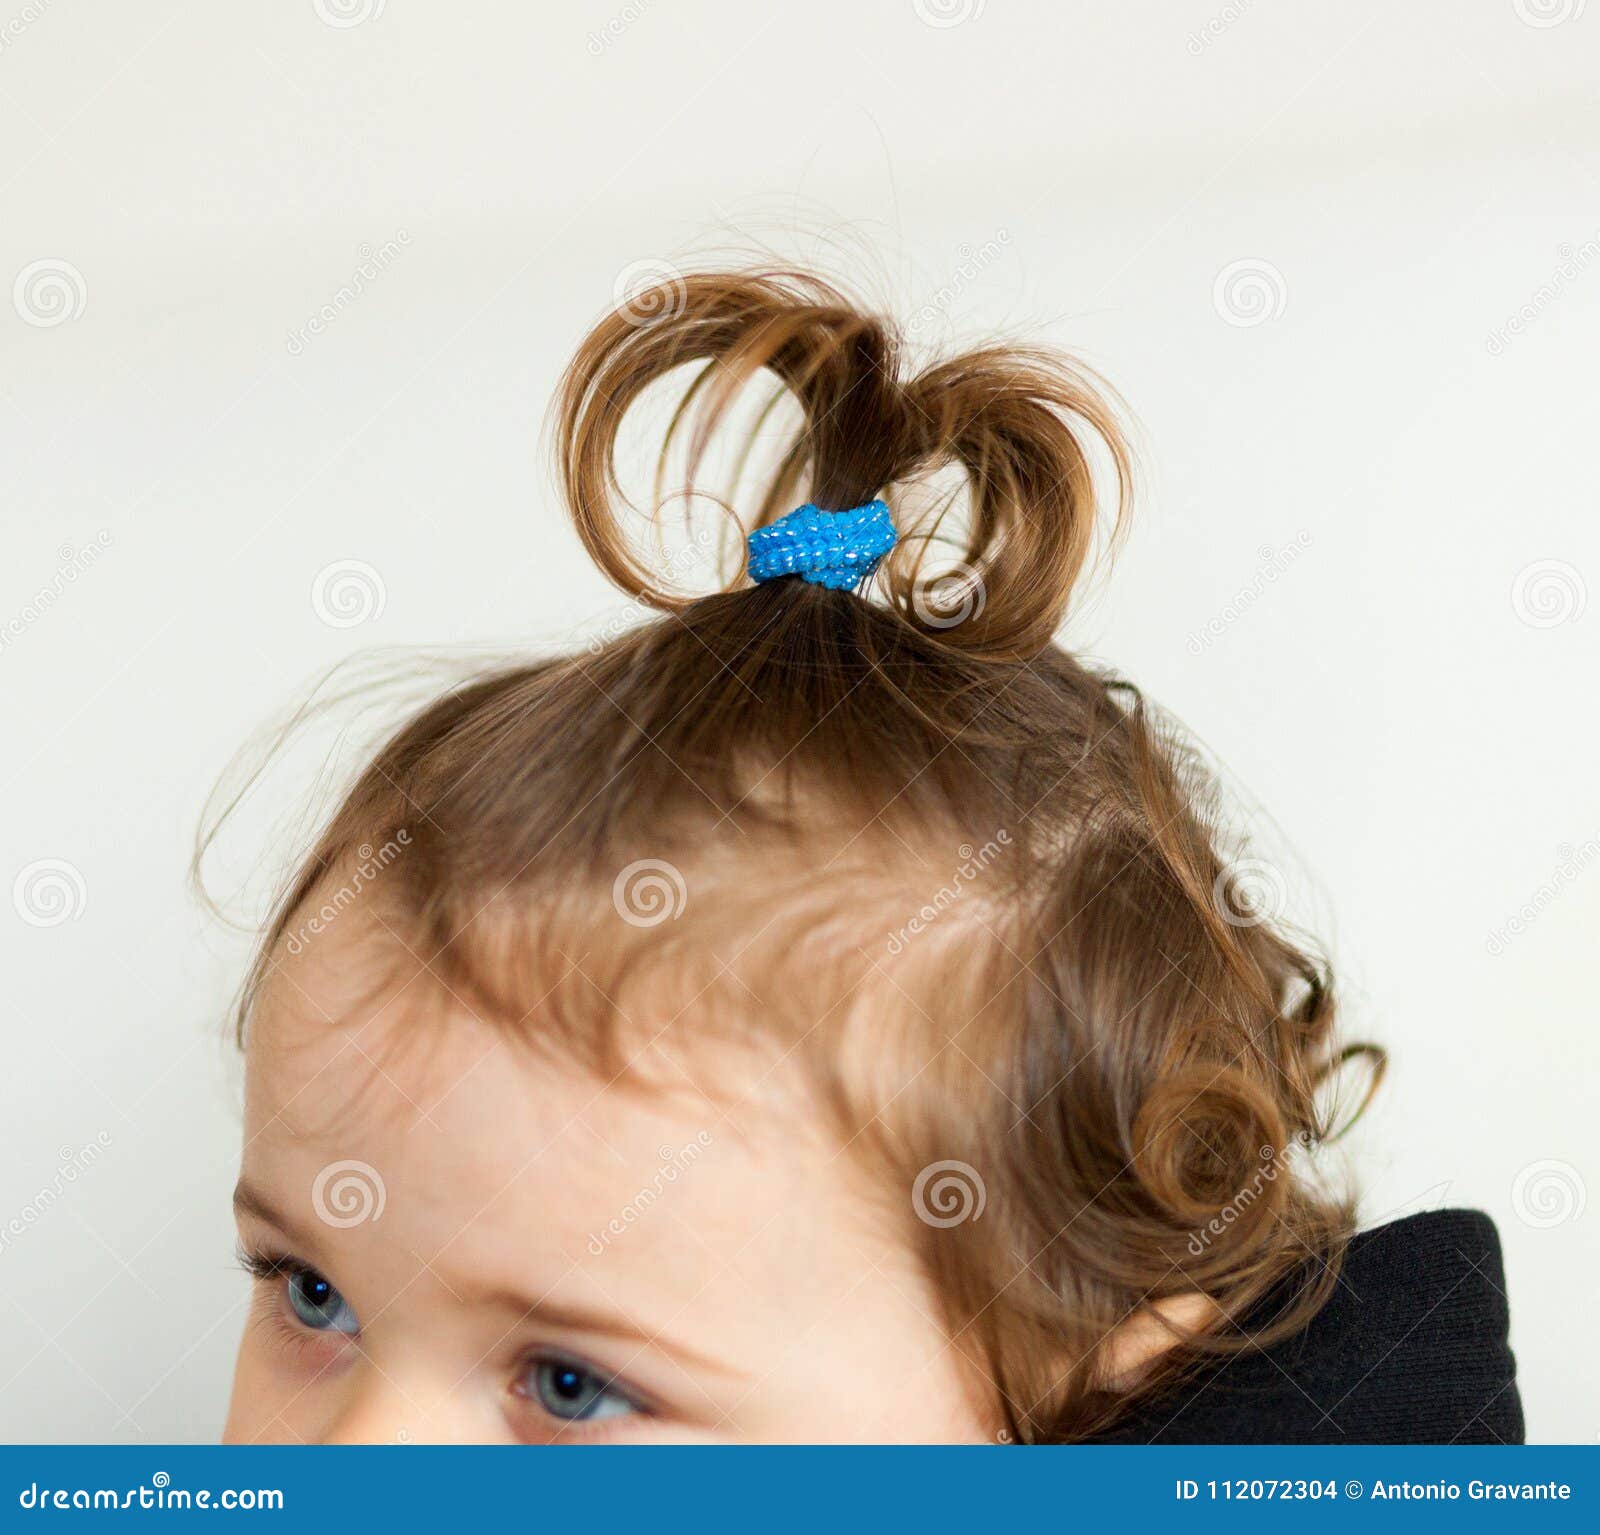 Hair Hairstyle Shaped Fountain or Onion of a Baby Girl. Stock Photo - Image  of ethnicity, cute: 112072304